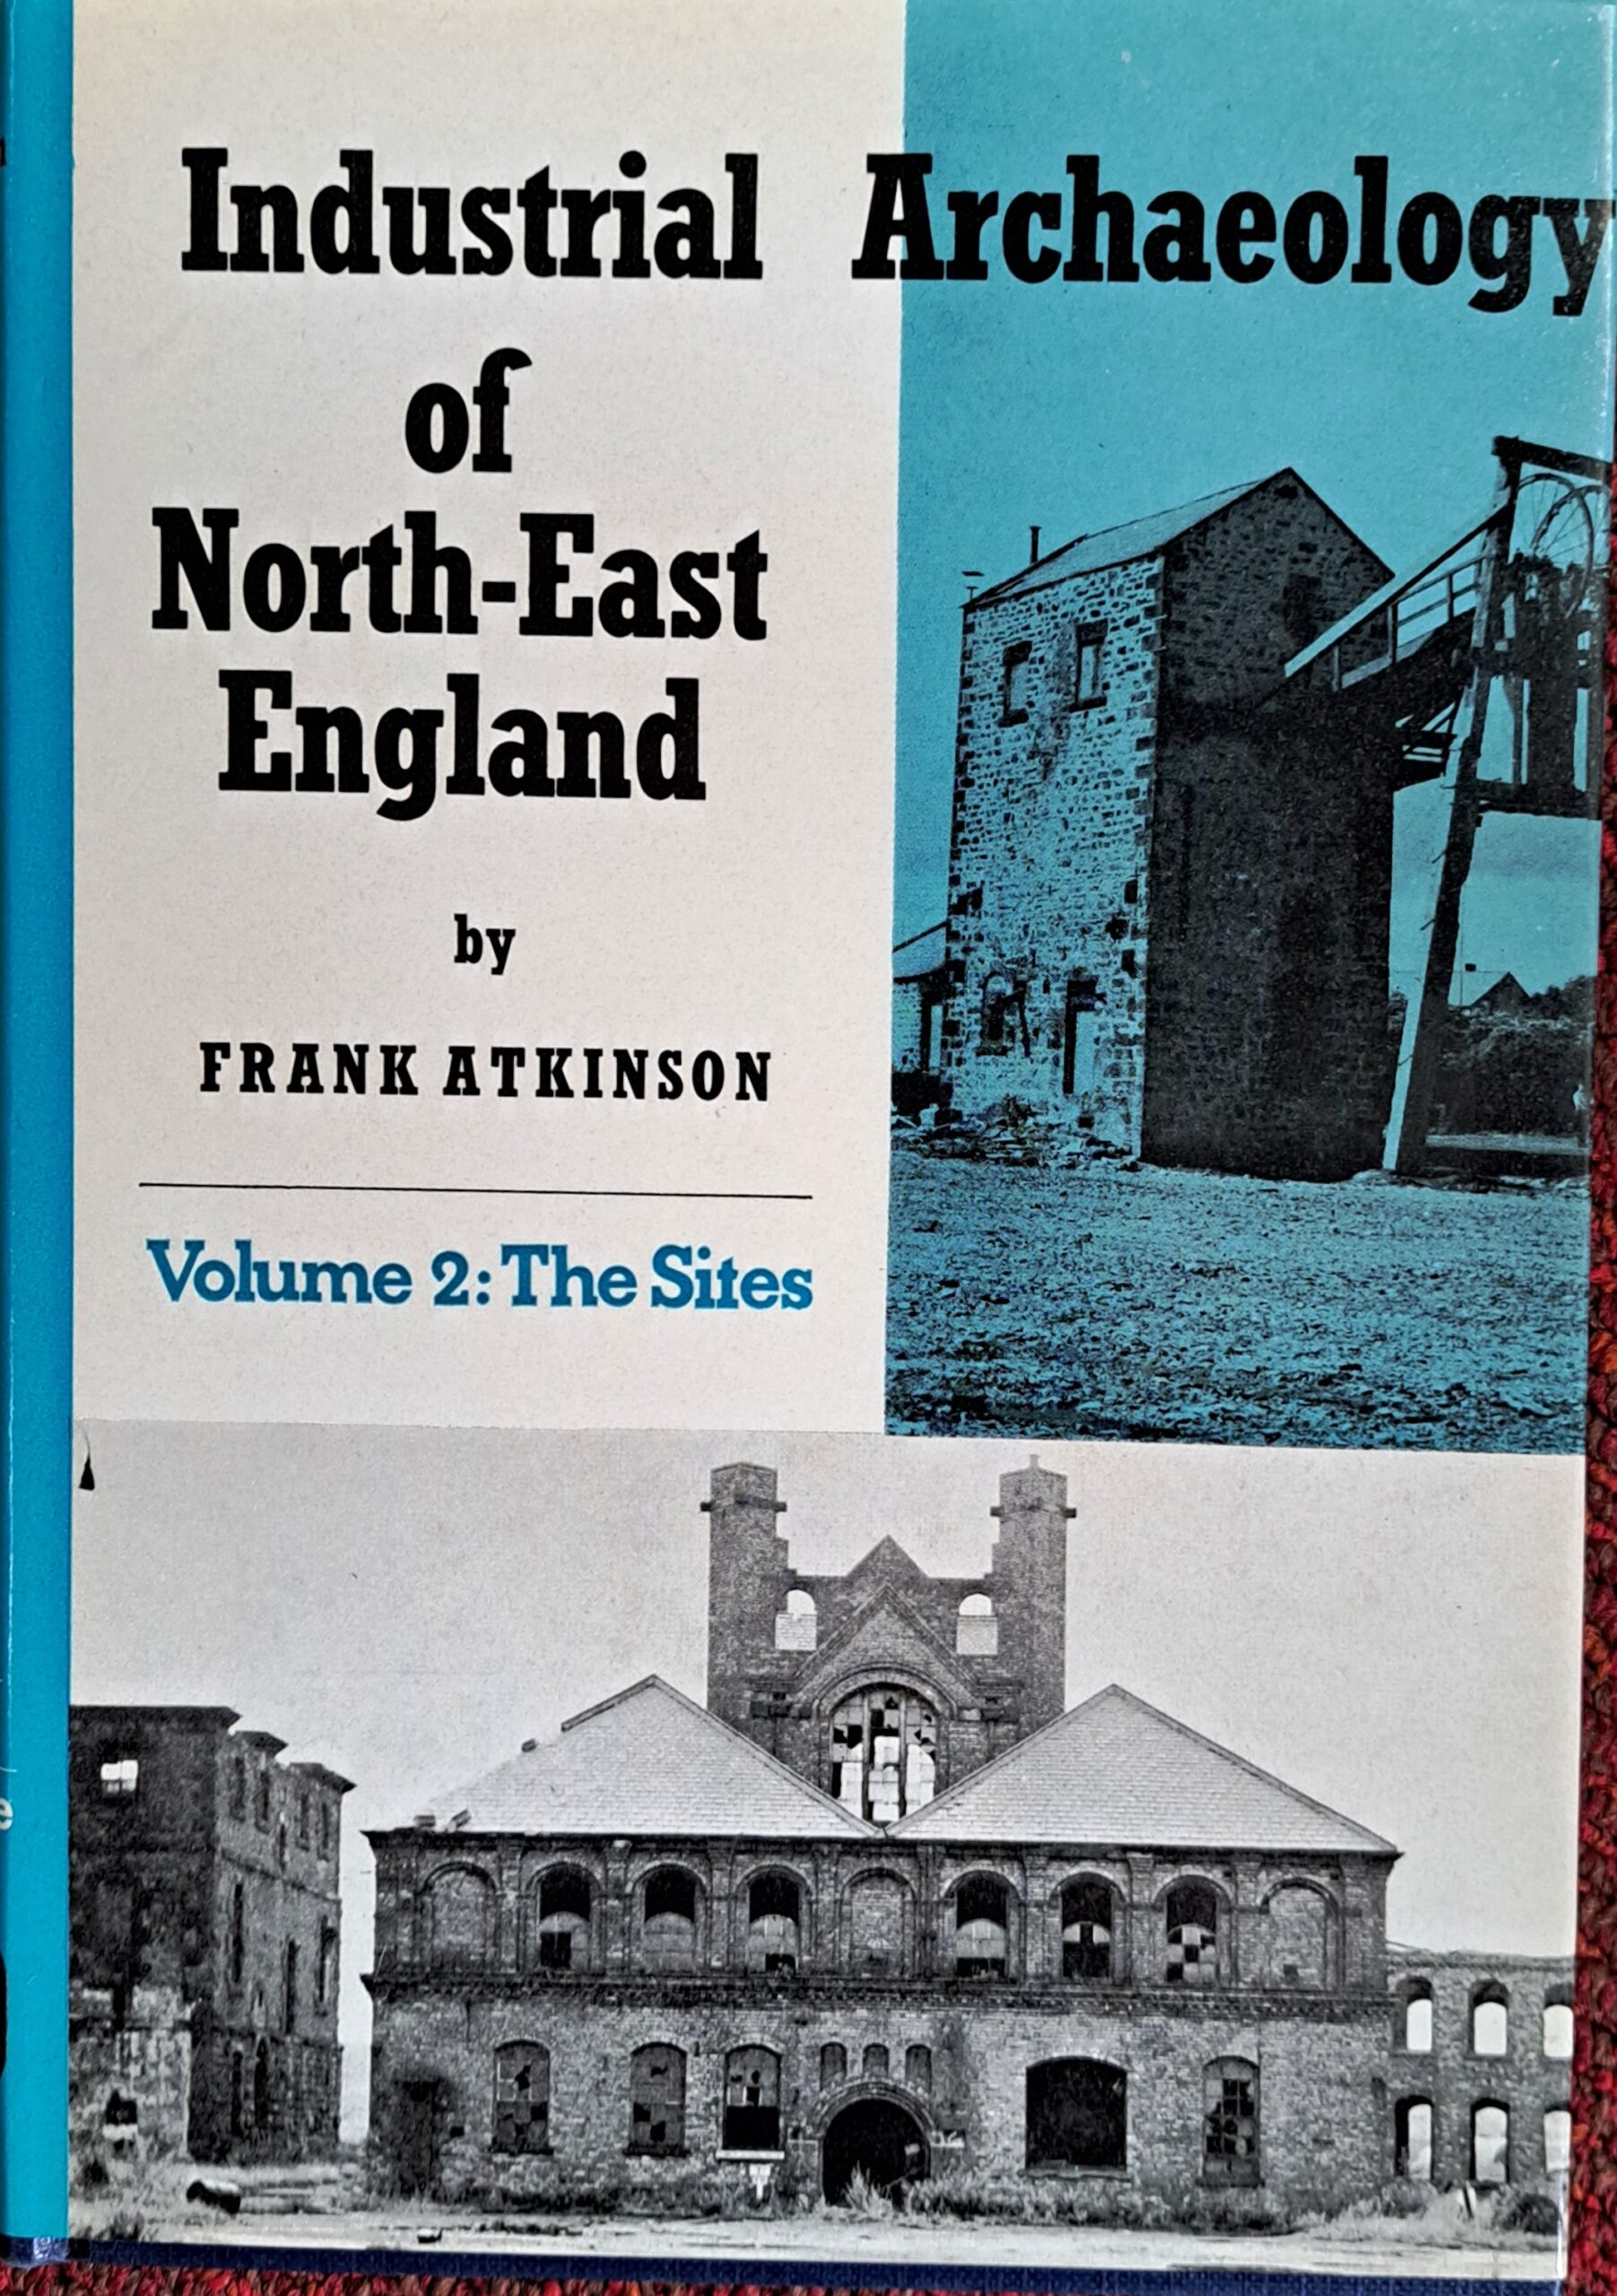 Industrial Archaeology of North-East England, Volume 2 - The Sites - Frank Atkinson - 1974